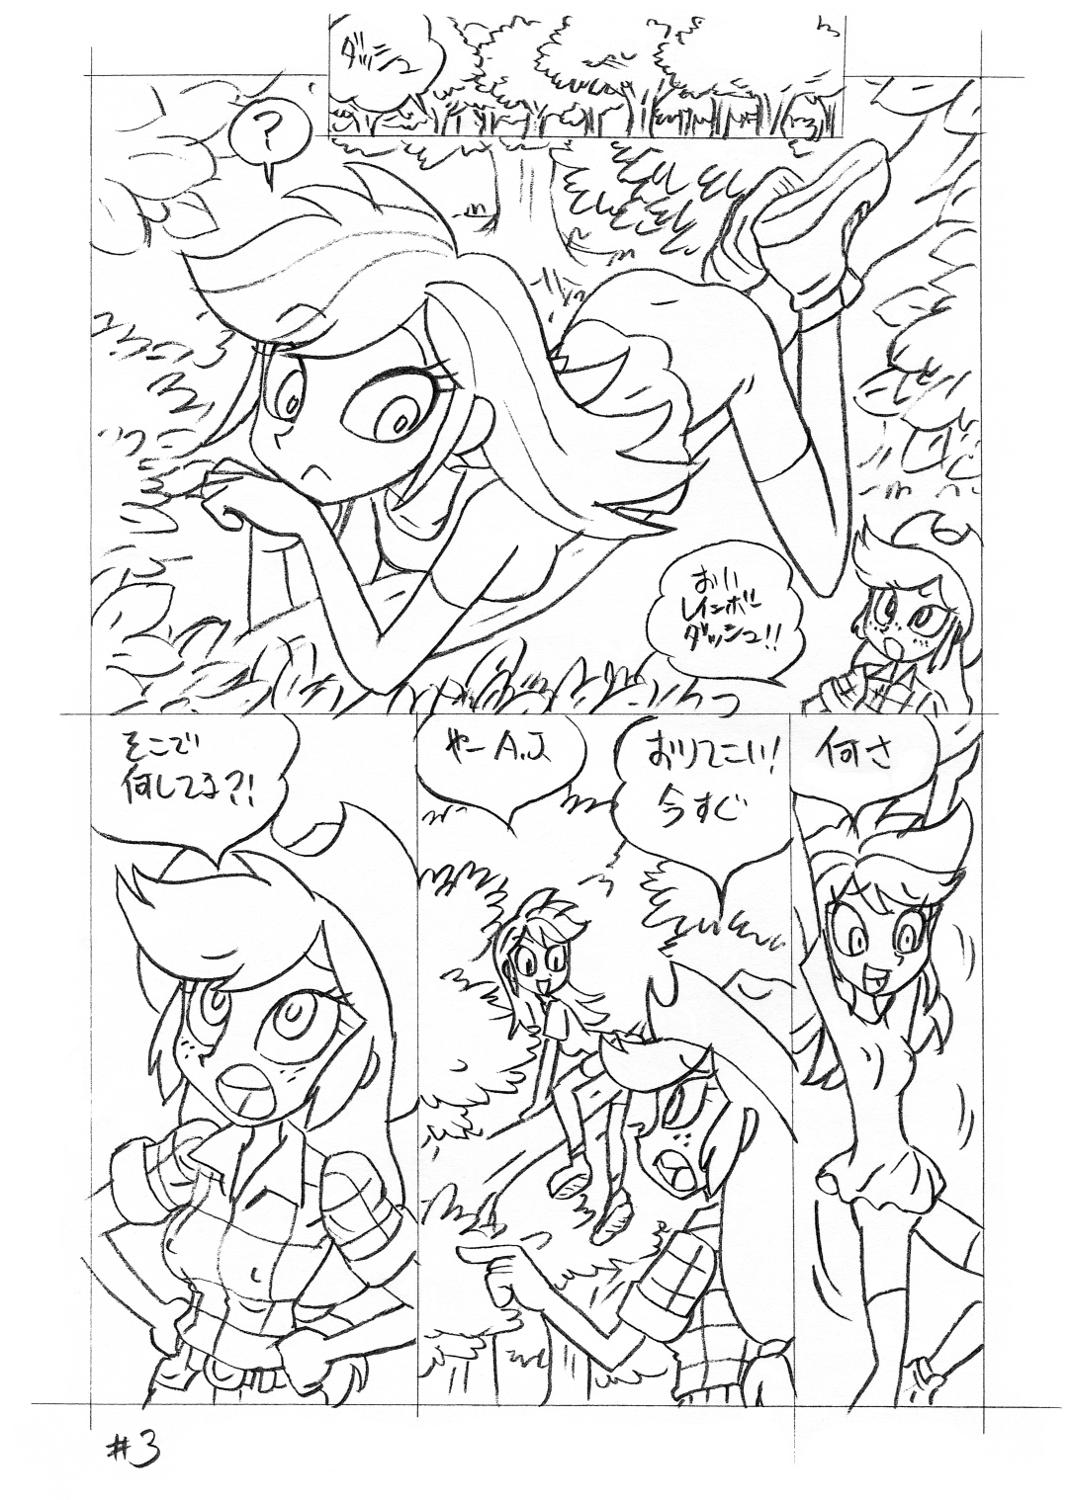 Babes Psychosomatic Counterfeit EX- A.J. in E.G. Style - My little pony friendship is magic Naked Sluts - Page 2